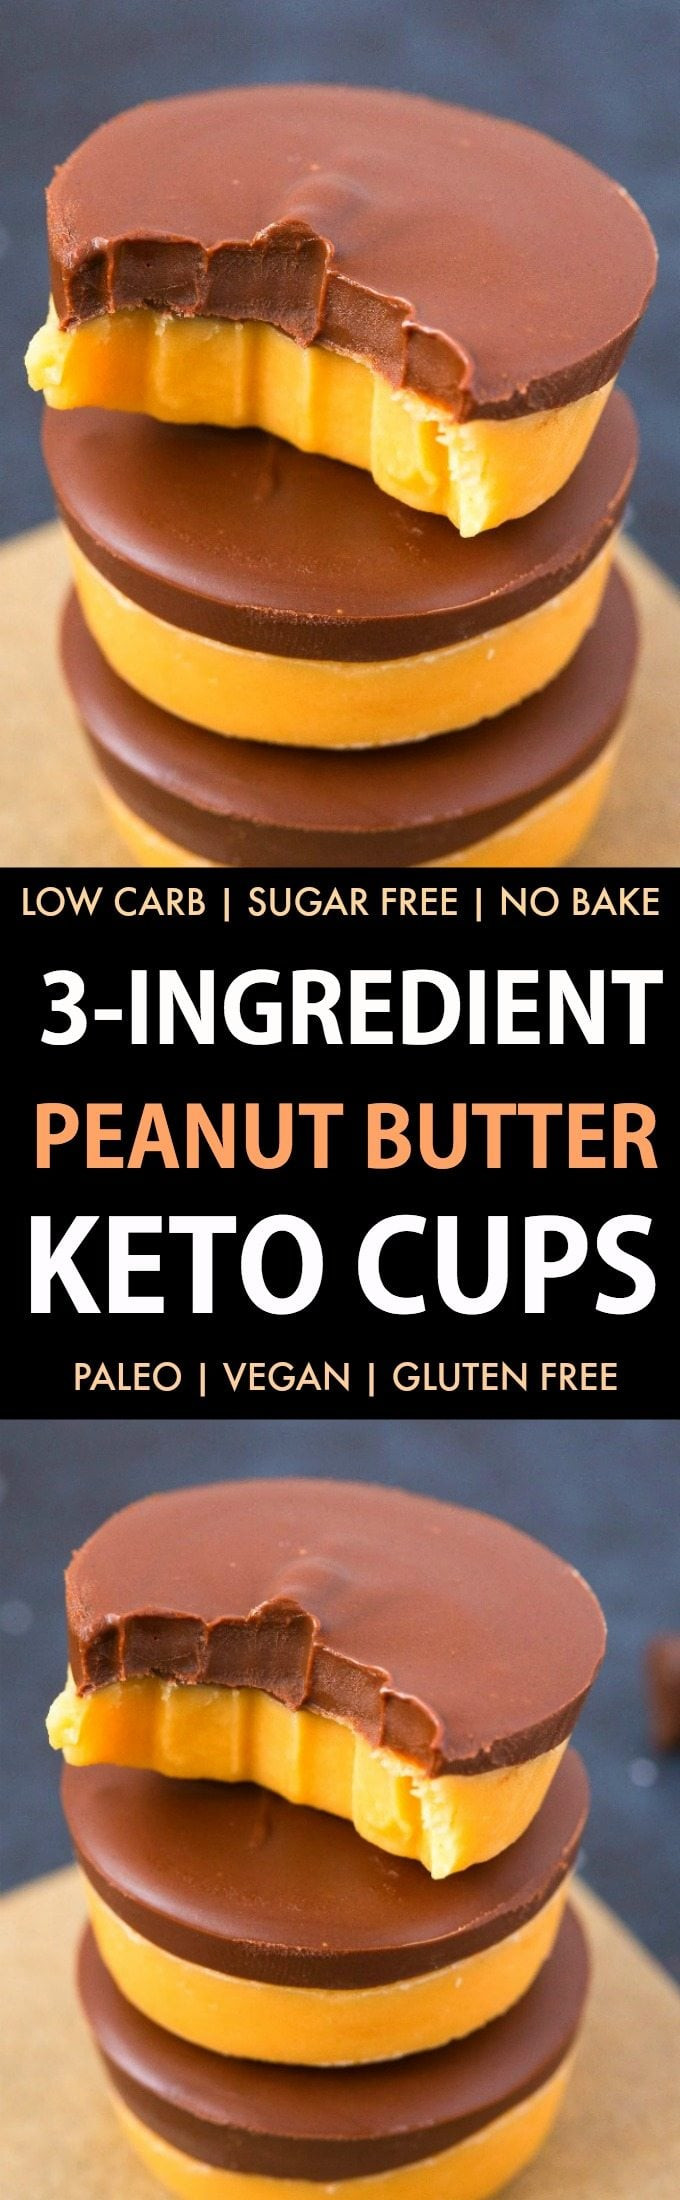 Easy Keto Recipes 3 Ingredients
 Healthy 3 Ingre nt Keto Peanut Butter Fudge Low Carb